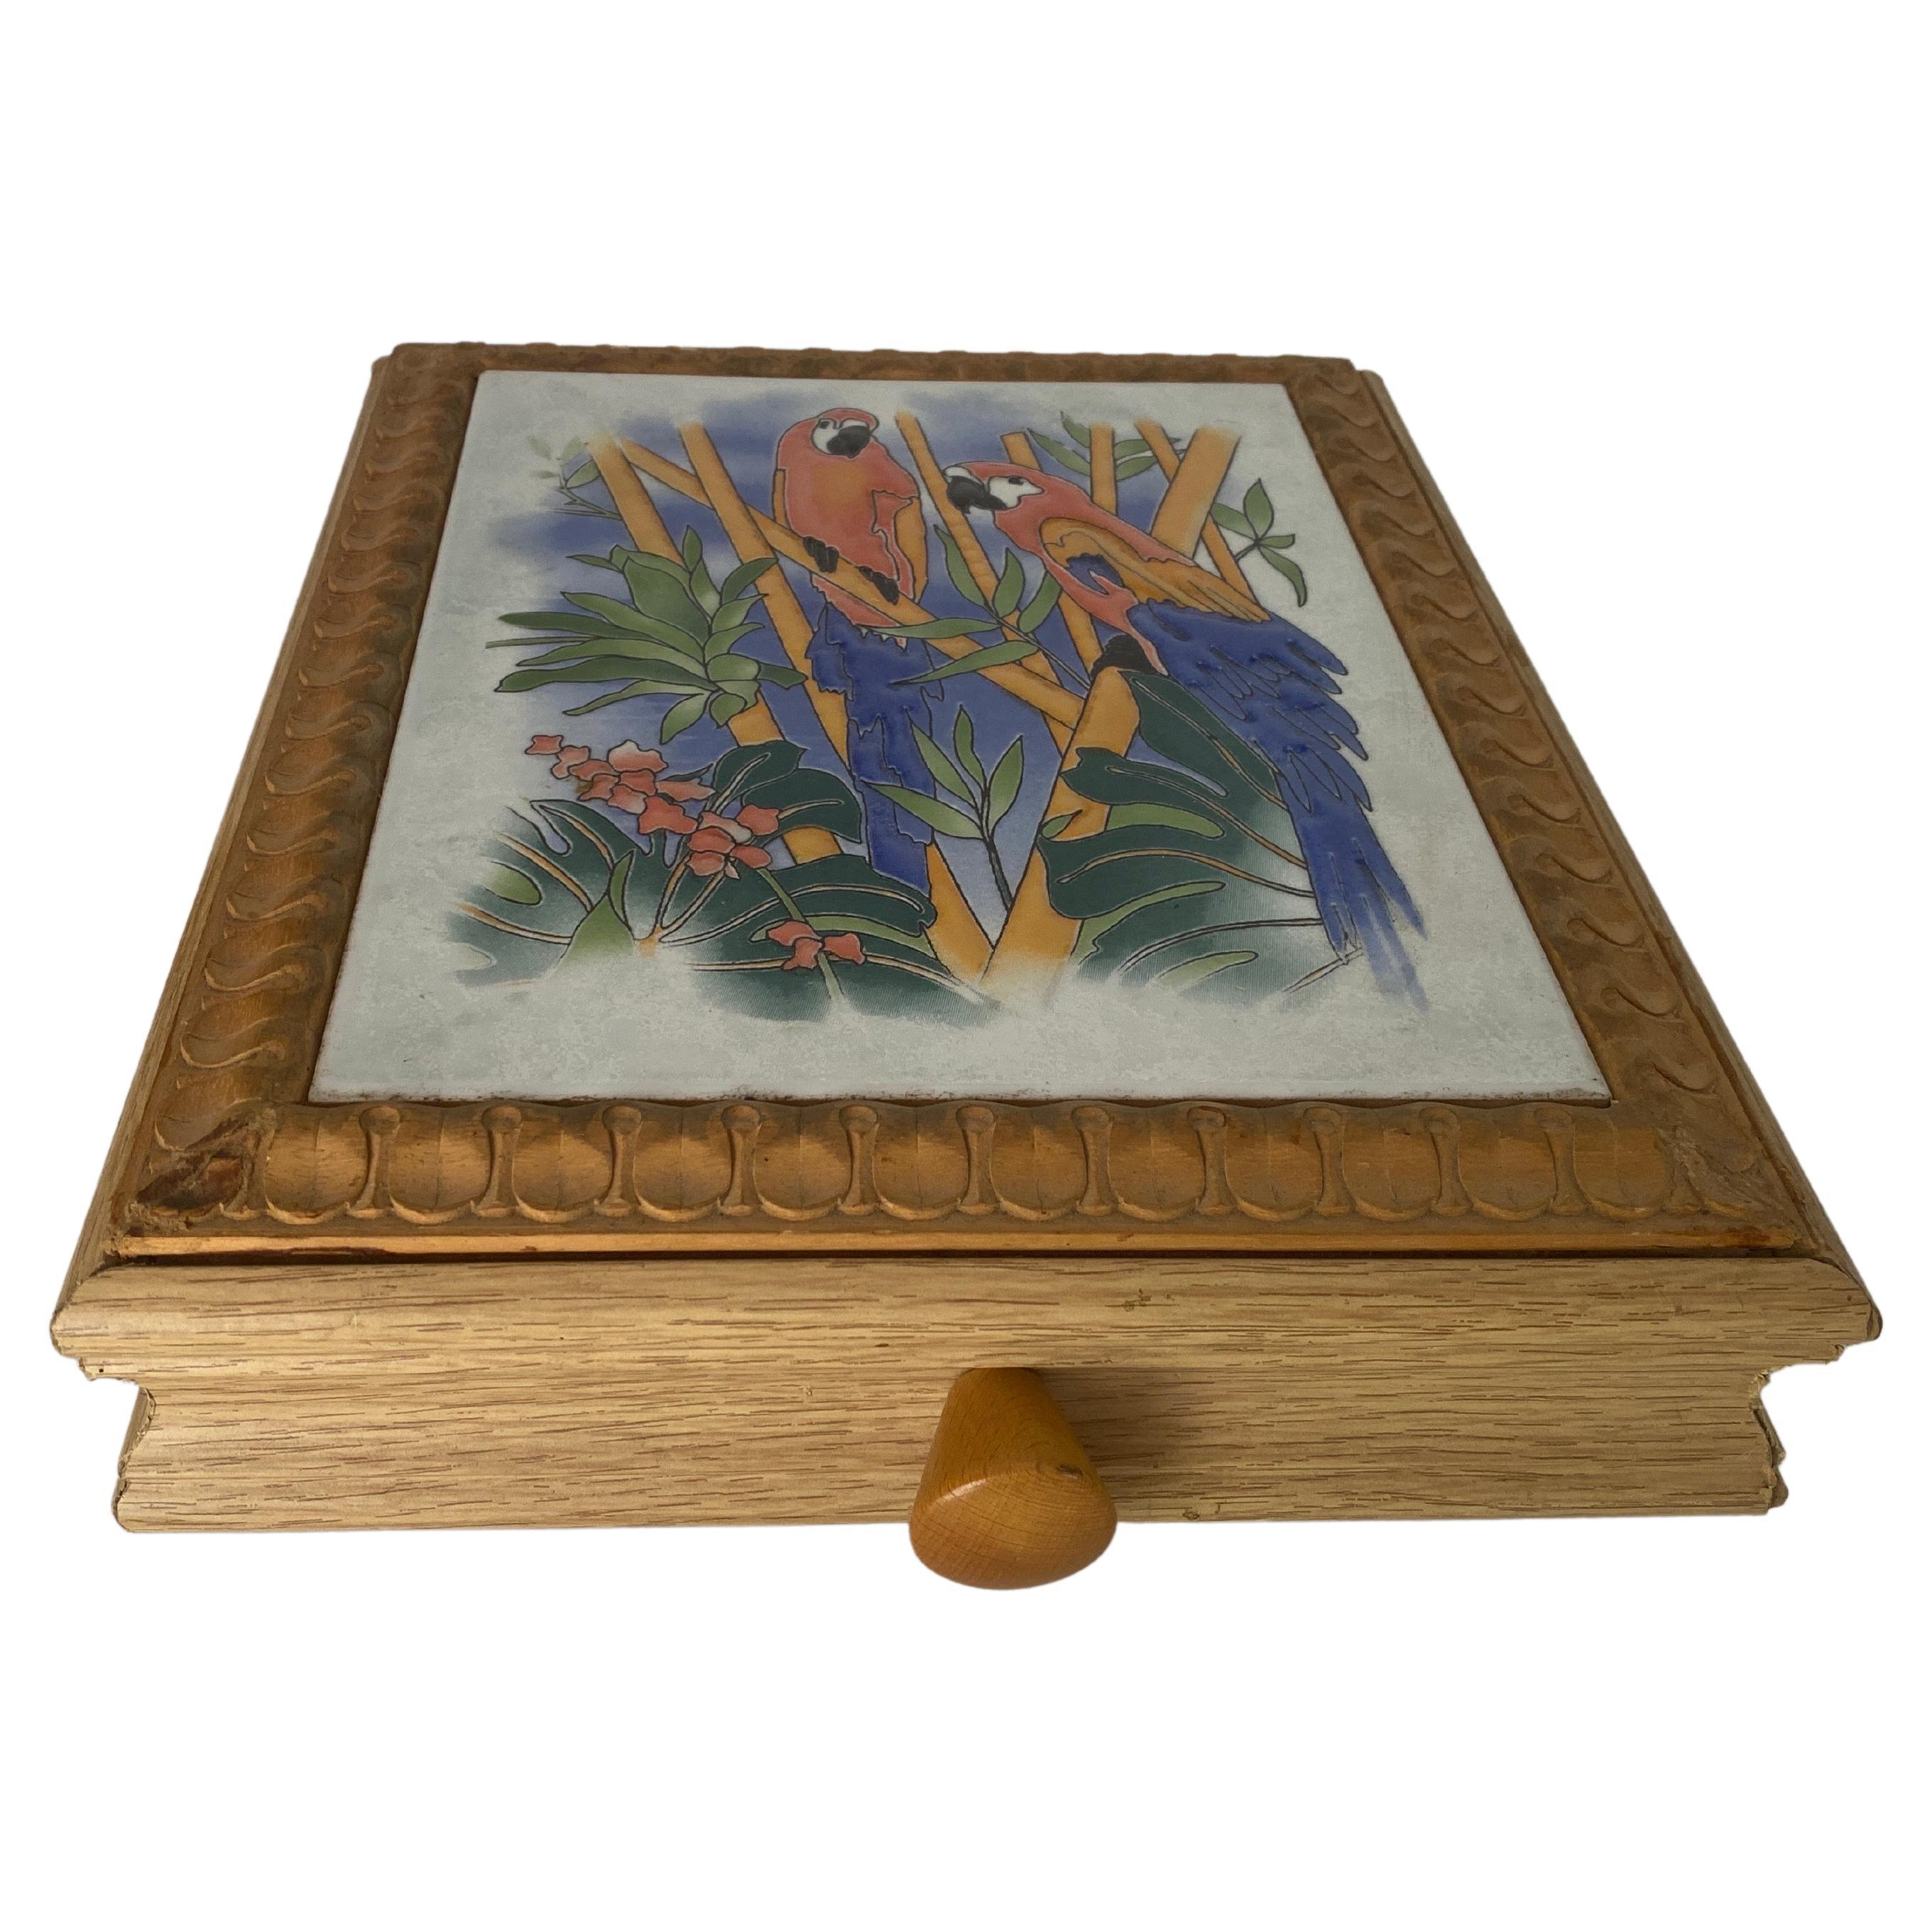 Ceramic Center Table or Trivet with a wood box Made in France, circa 1970